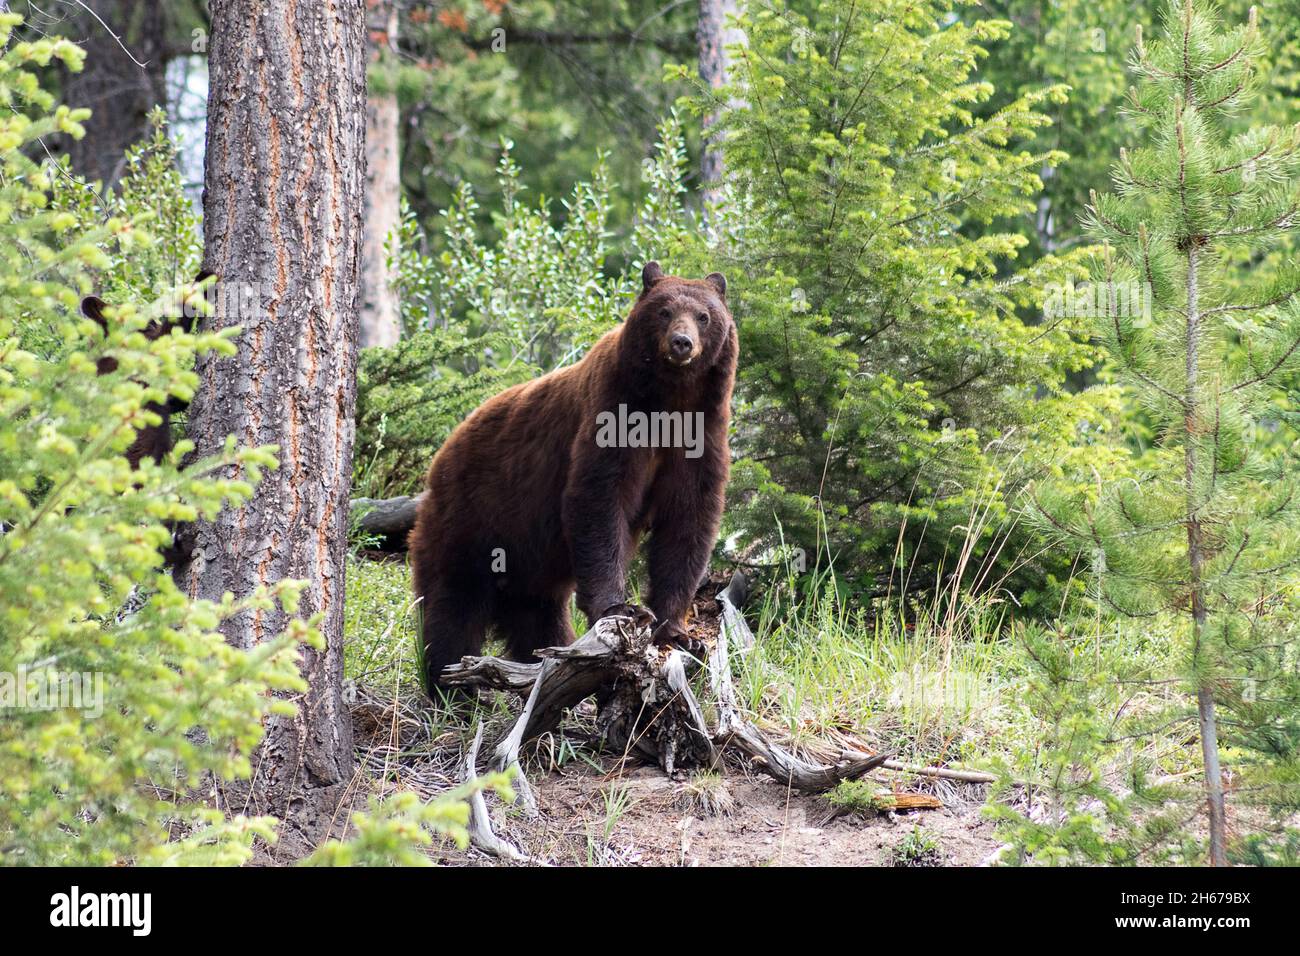 Mom cinnamon black bear watching camera while cub climbs tree  next to her. Surrounded by trees, green grass Stock Photo